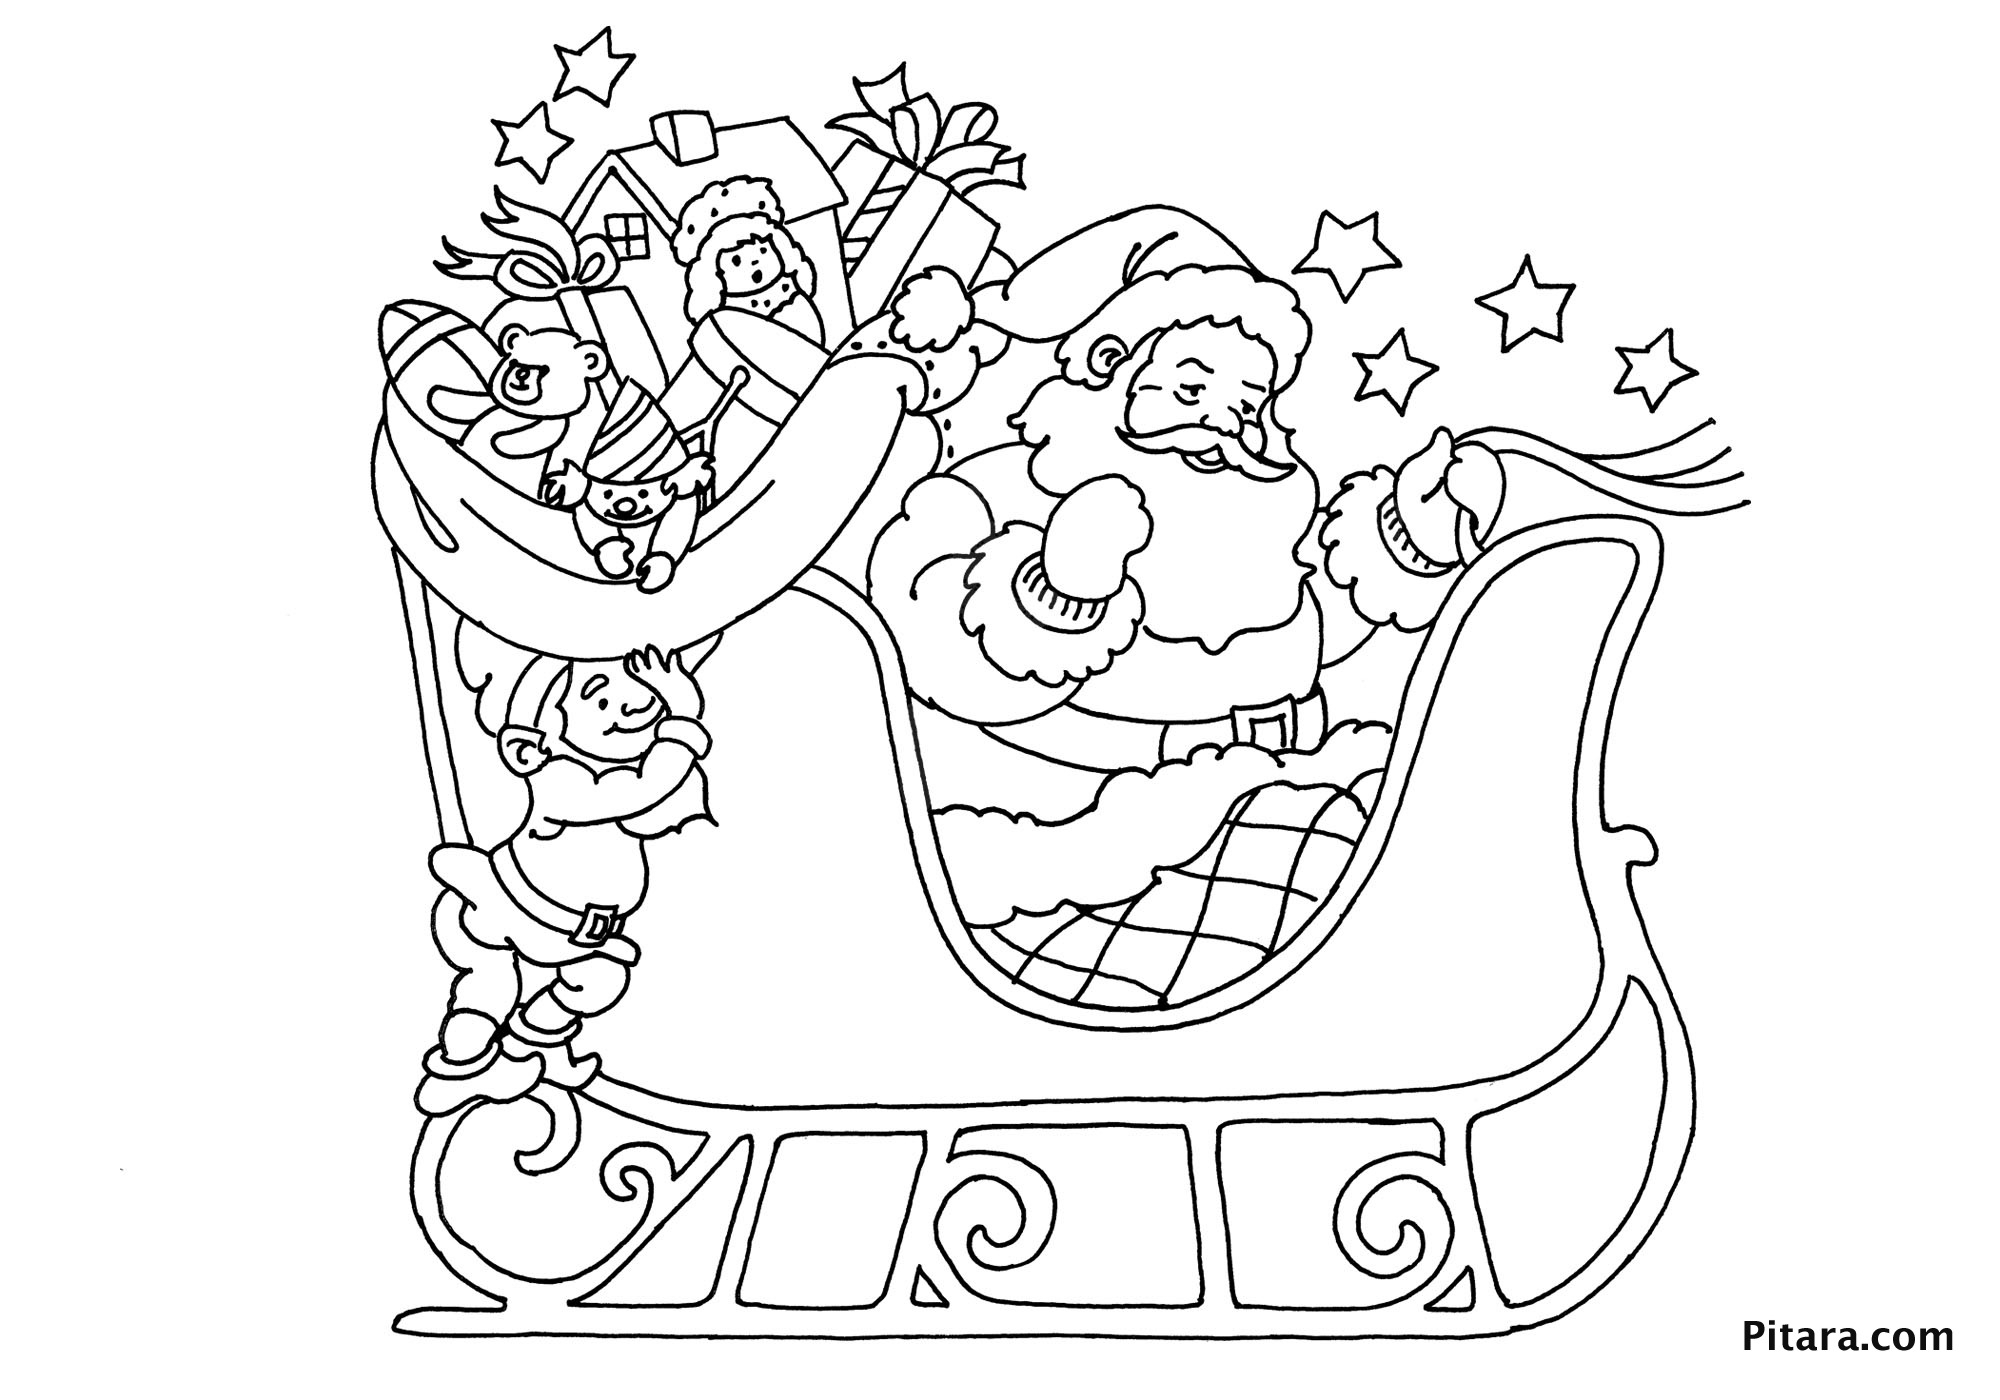 Santa Claus In Sleigh Coloring Page Christmas Coloring Pages For Kids Pitara Kids Network